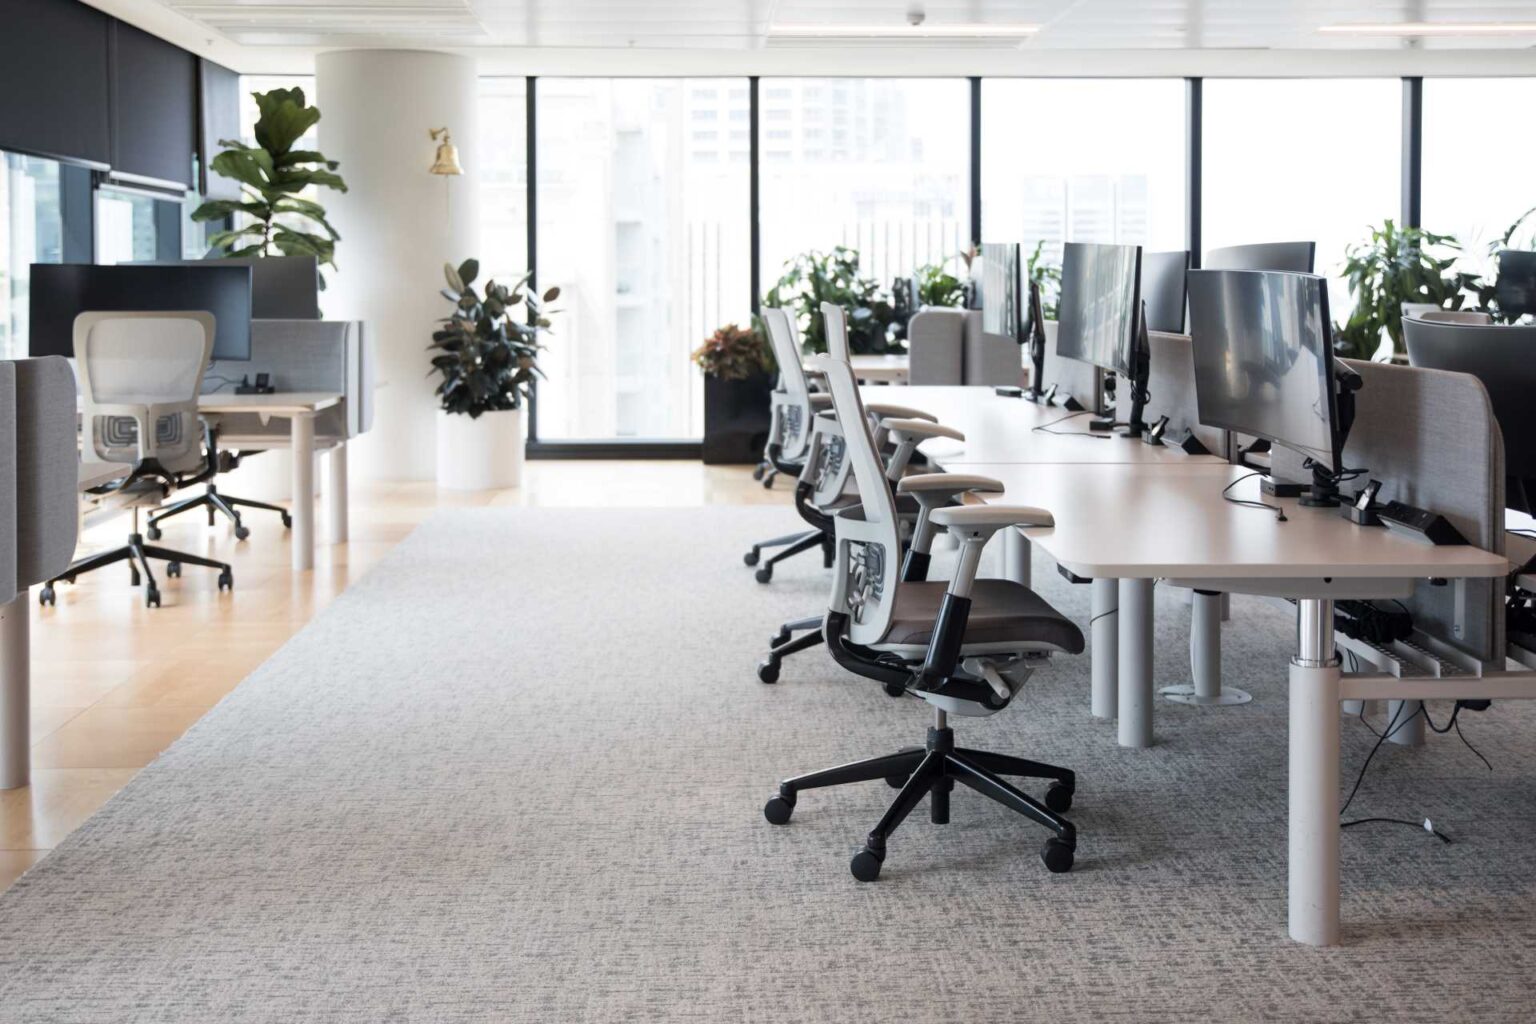 Modern office space | Featured Image for the Commercial Cleaning Company Home Page of QCS Cleaning.